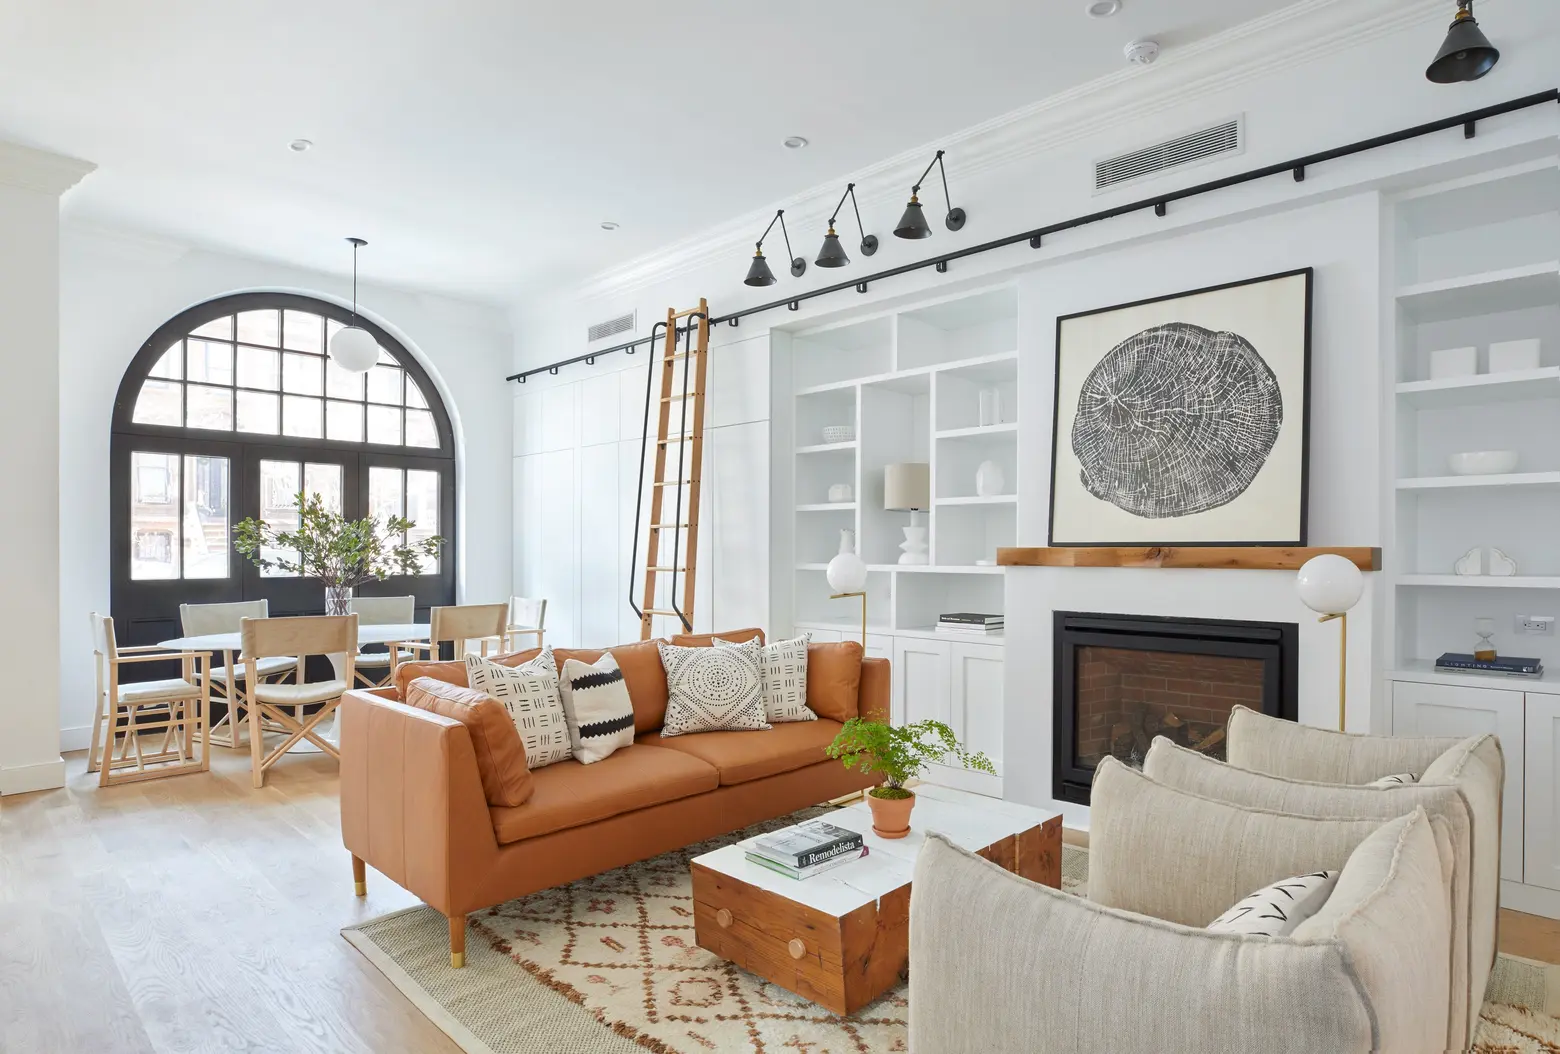 In Clinton Hill, two Brooklyn Home Company-designed carriage houses ask $3.4M apiece